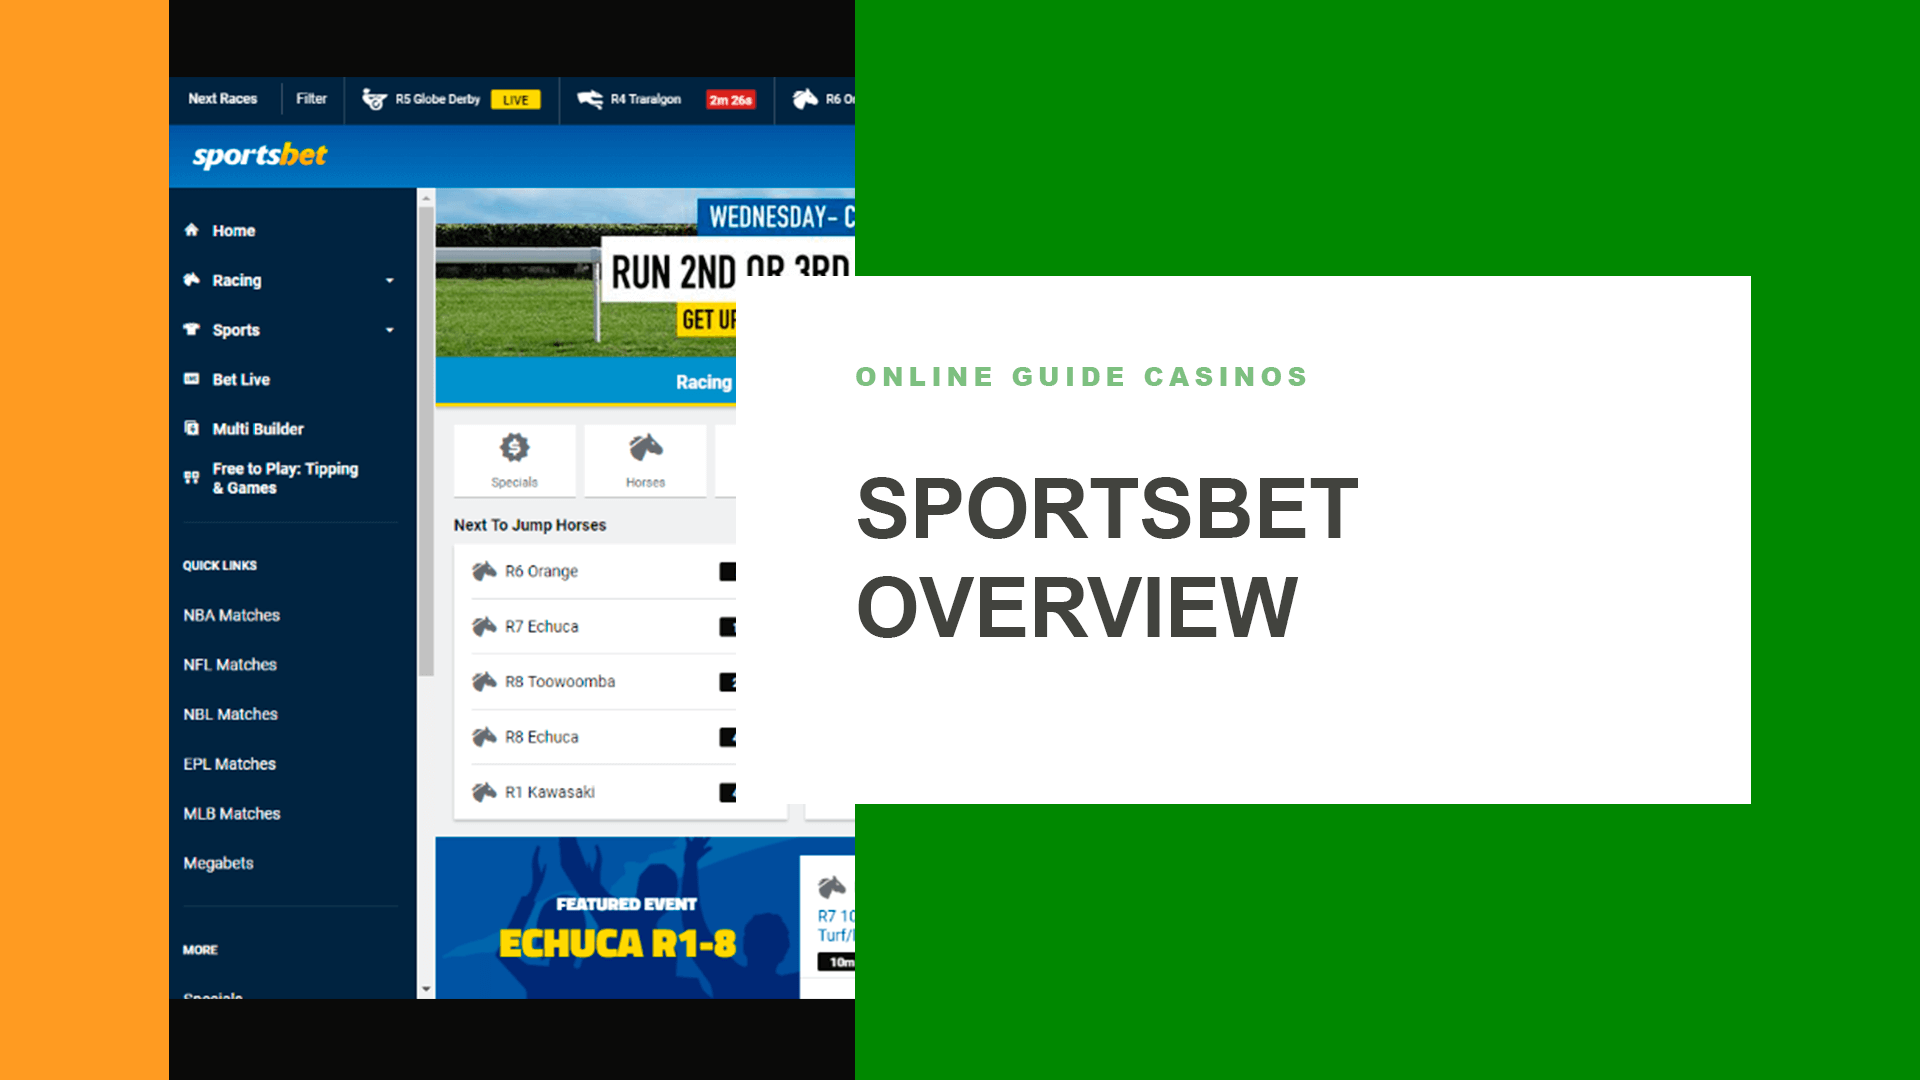 Sportsbet Casino and Betting Overview